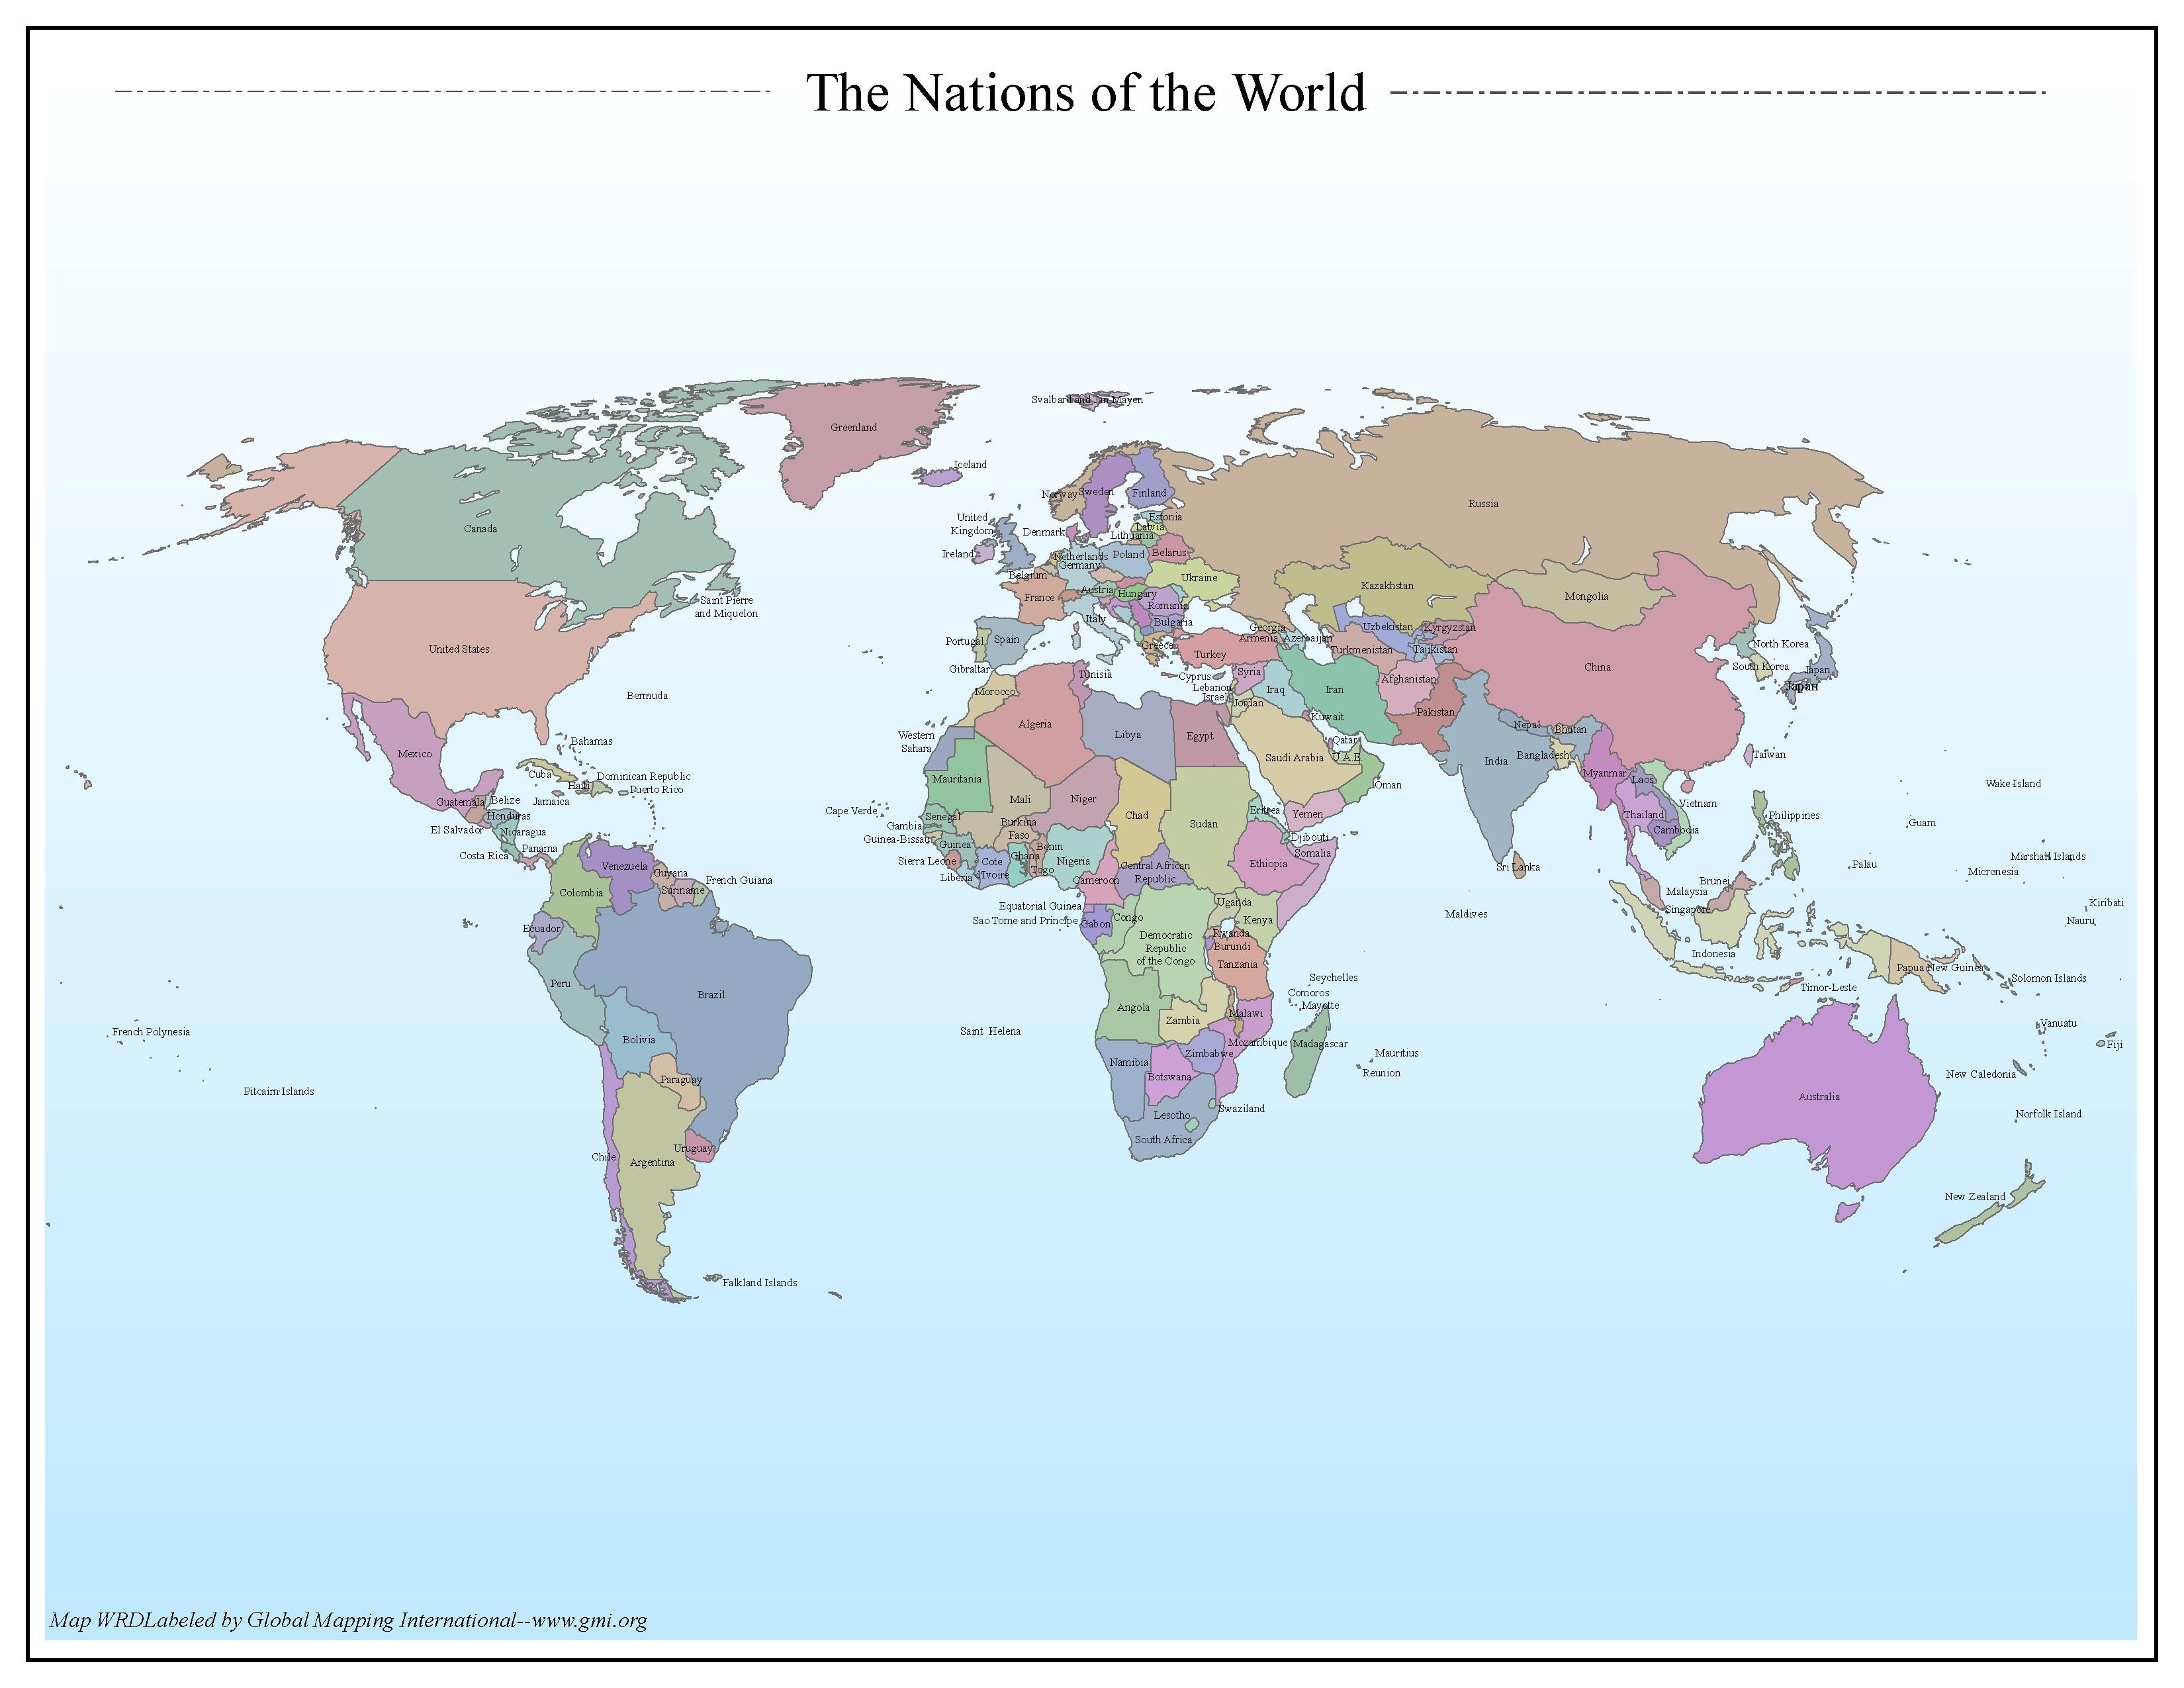 The Nations of the World